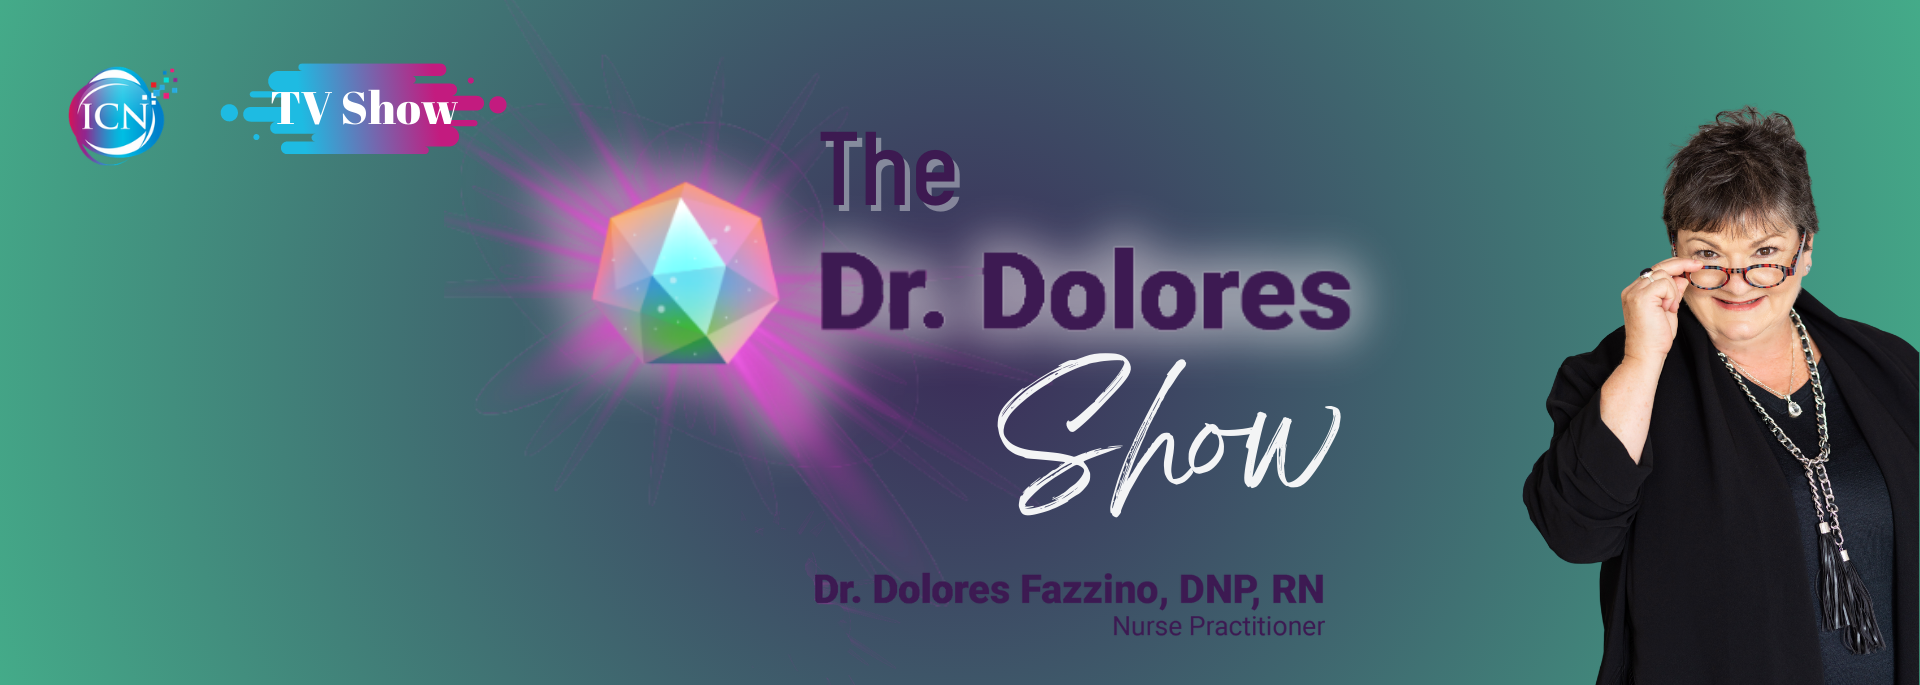 The Dr. Dolores Show channel